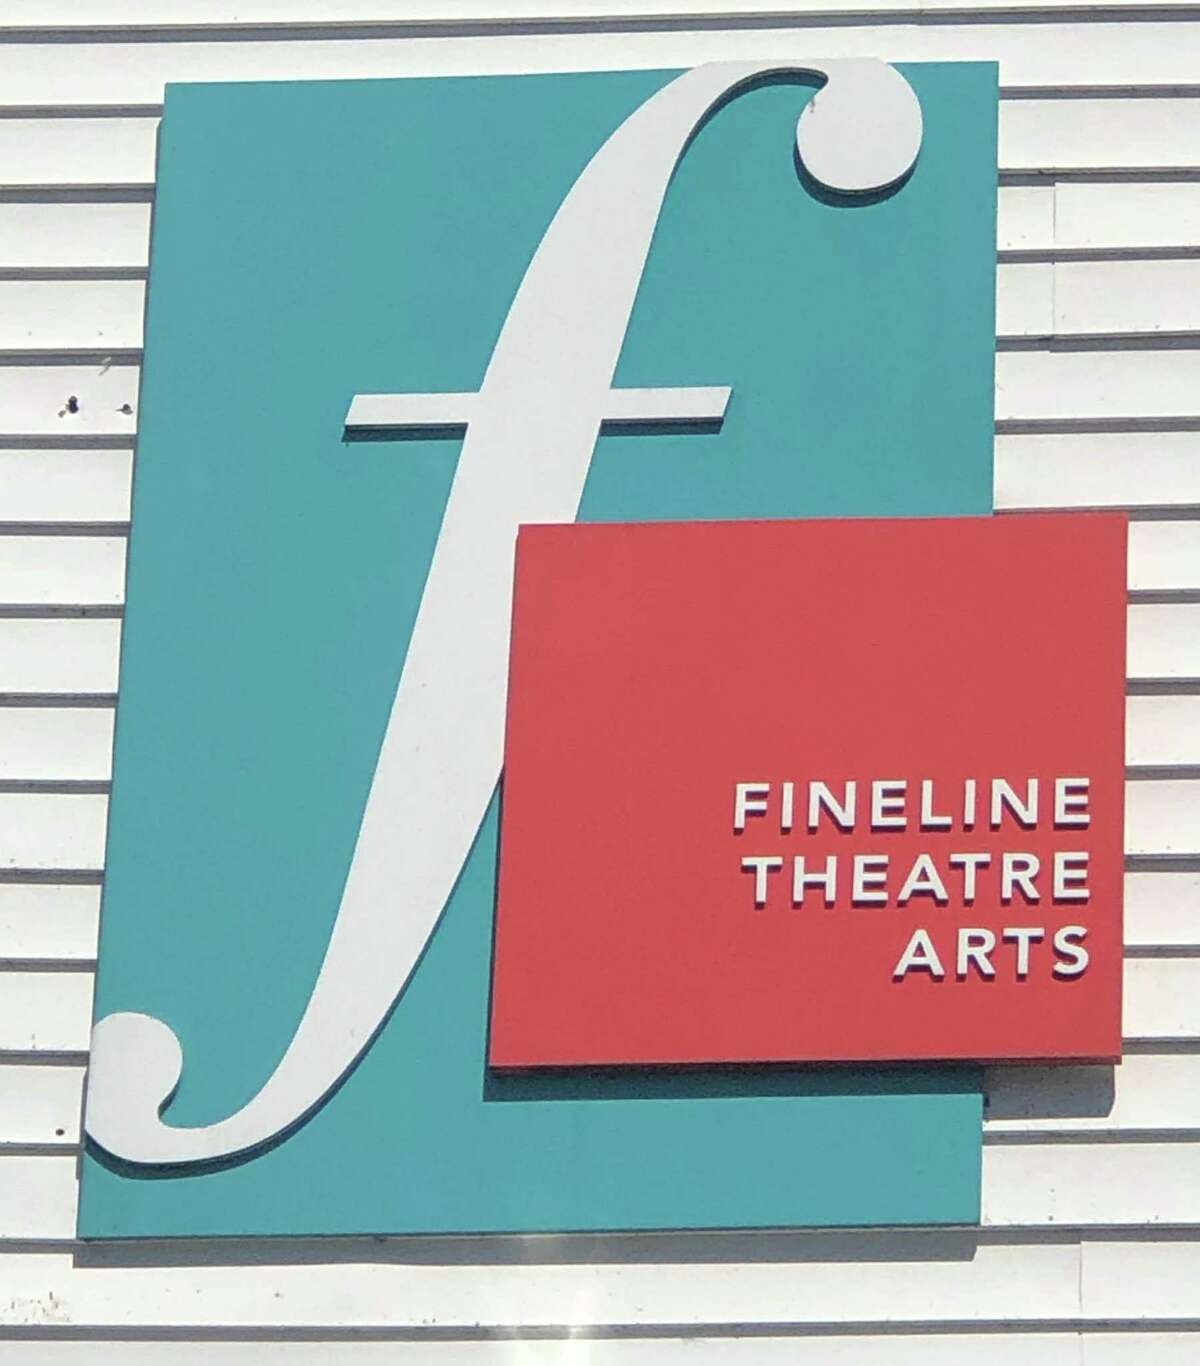 FineLine Theatre Arts in New Milford is keeping busy during the coronavirus pandemic, moving ahead with plans for its fall start, implementing a new program, Creative Assistance for Parents.